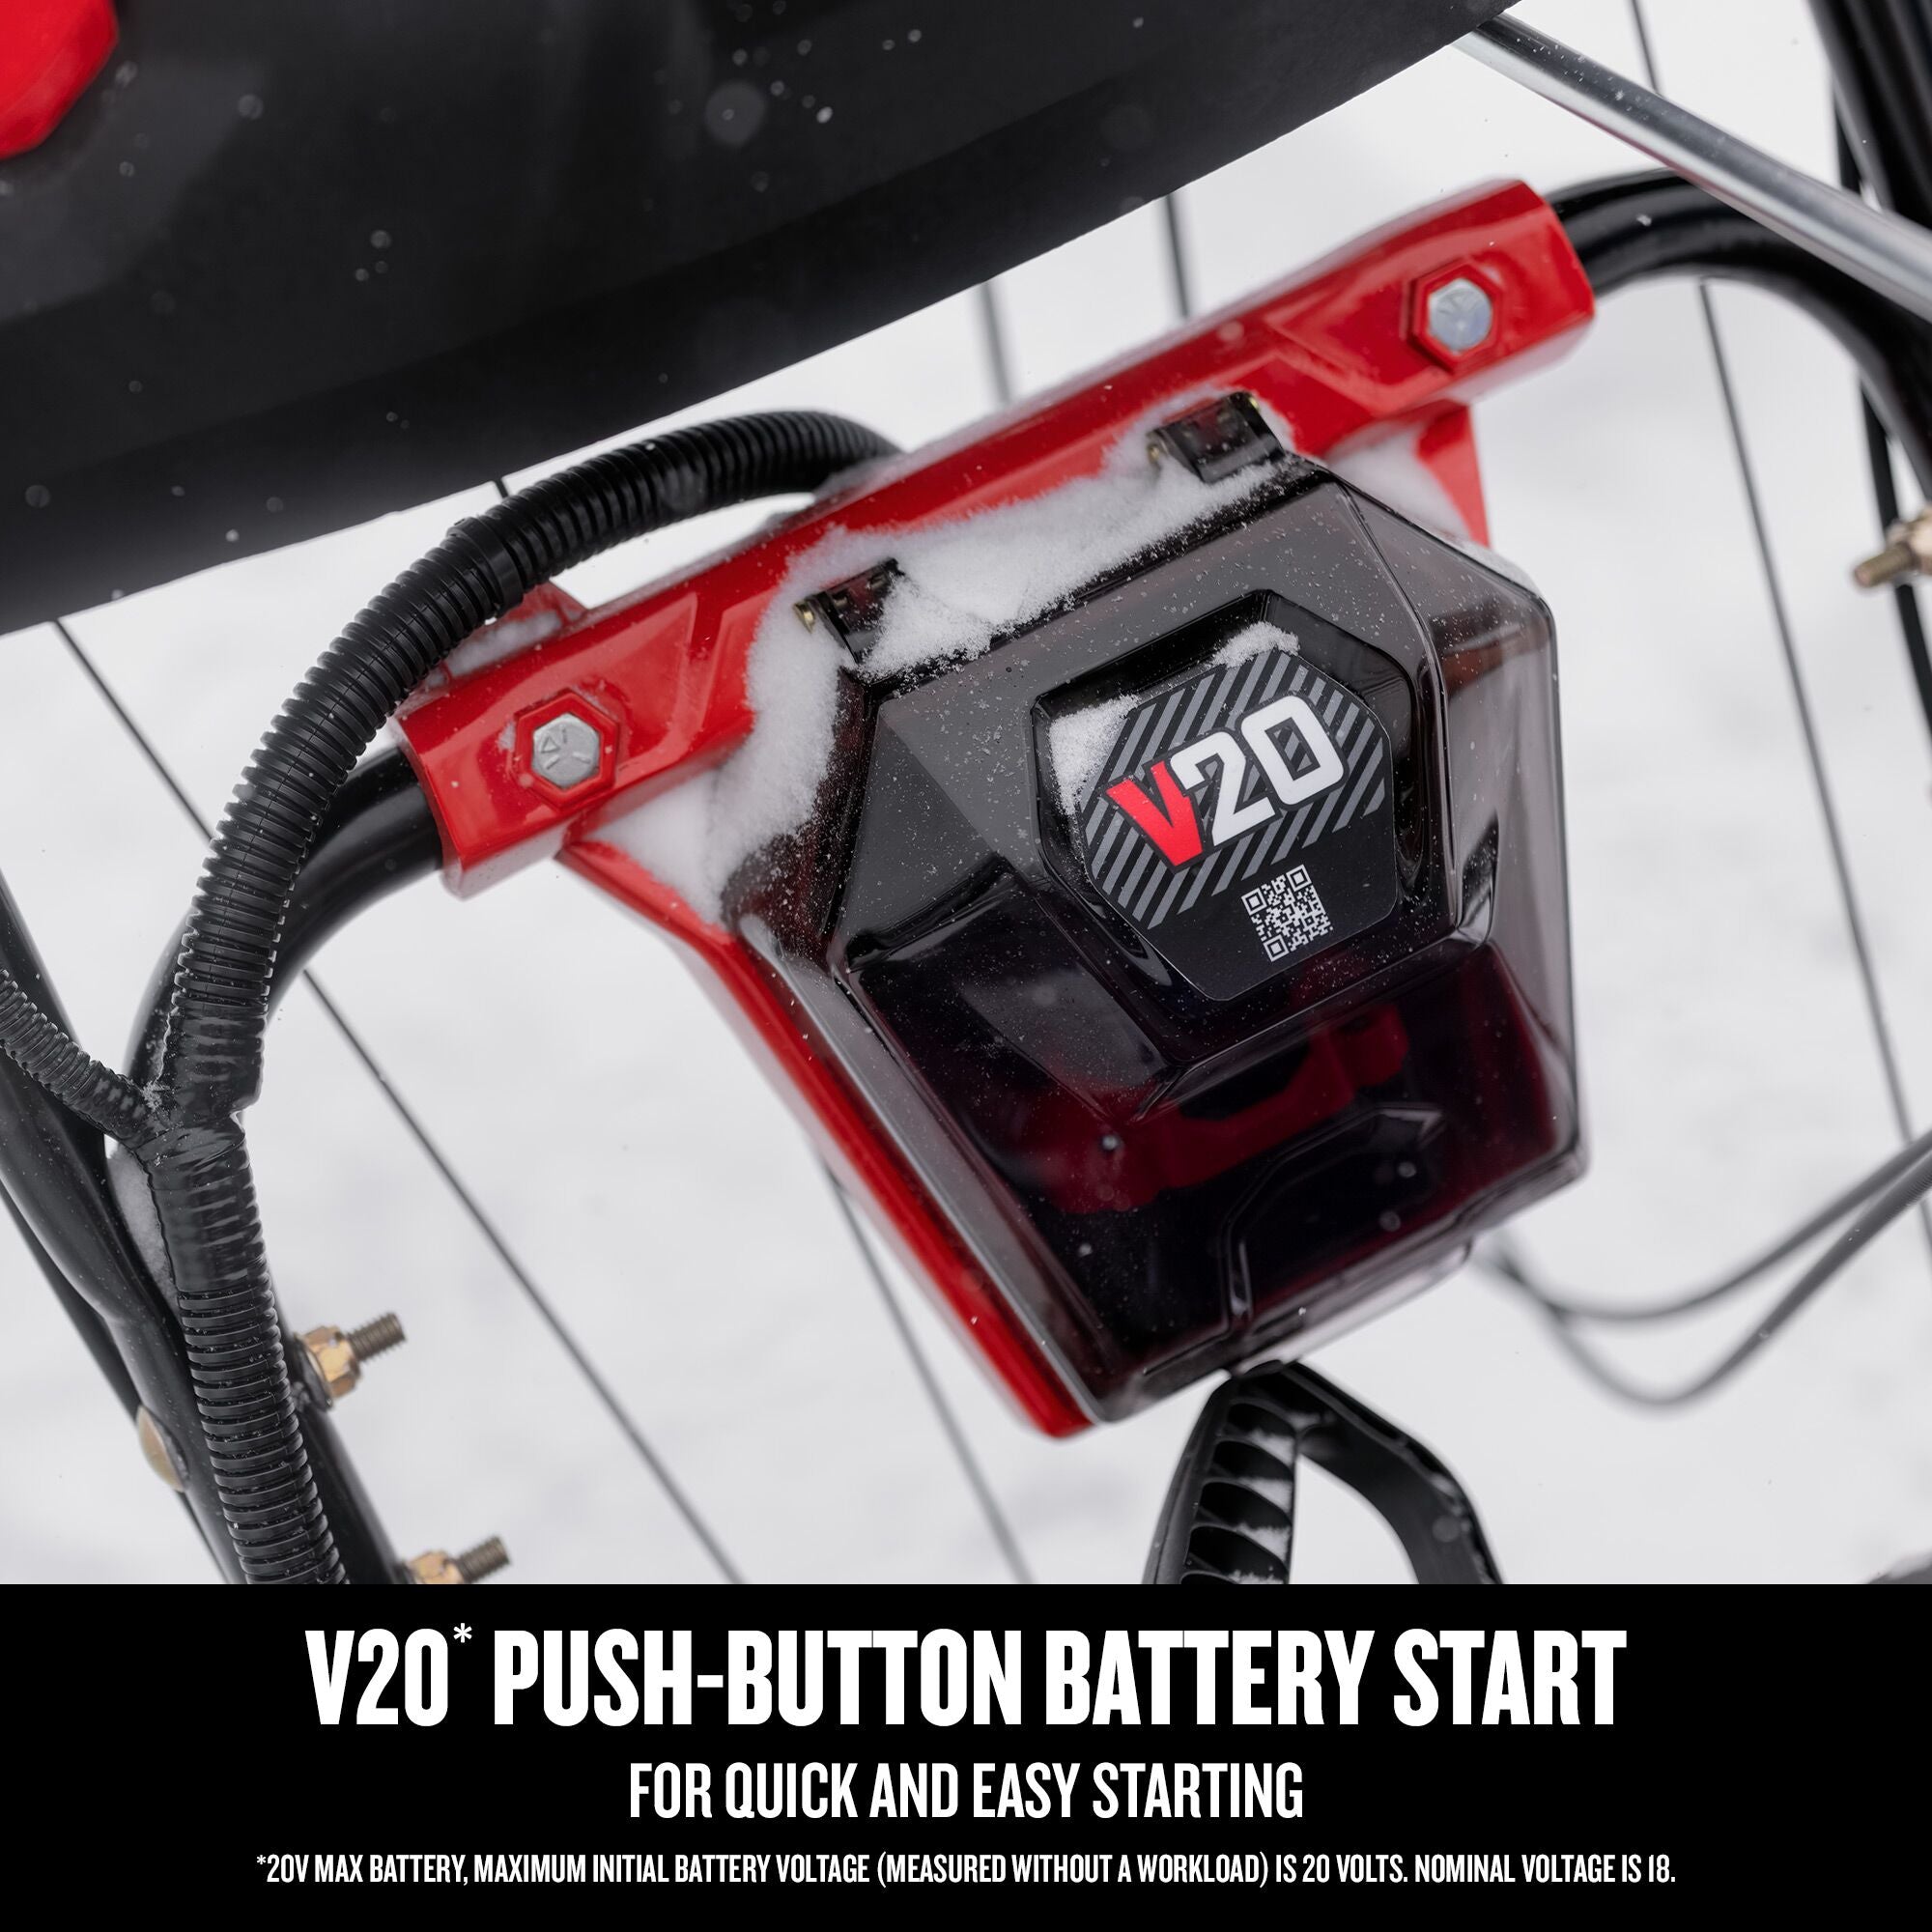 CRAFTSMAN V20* Start 26-in. 243-cc Two Stage Gas Snow Blower focused in on V20* Push-Button Battery Start